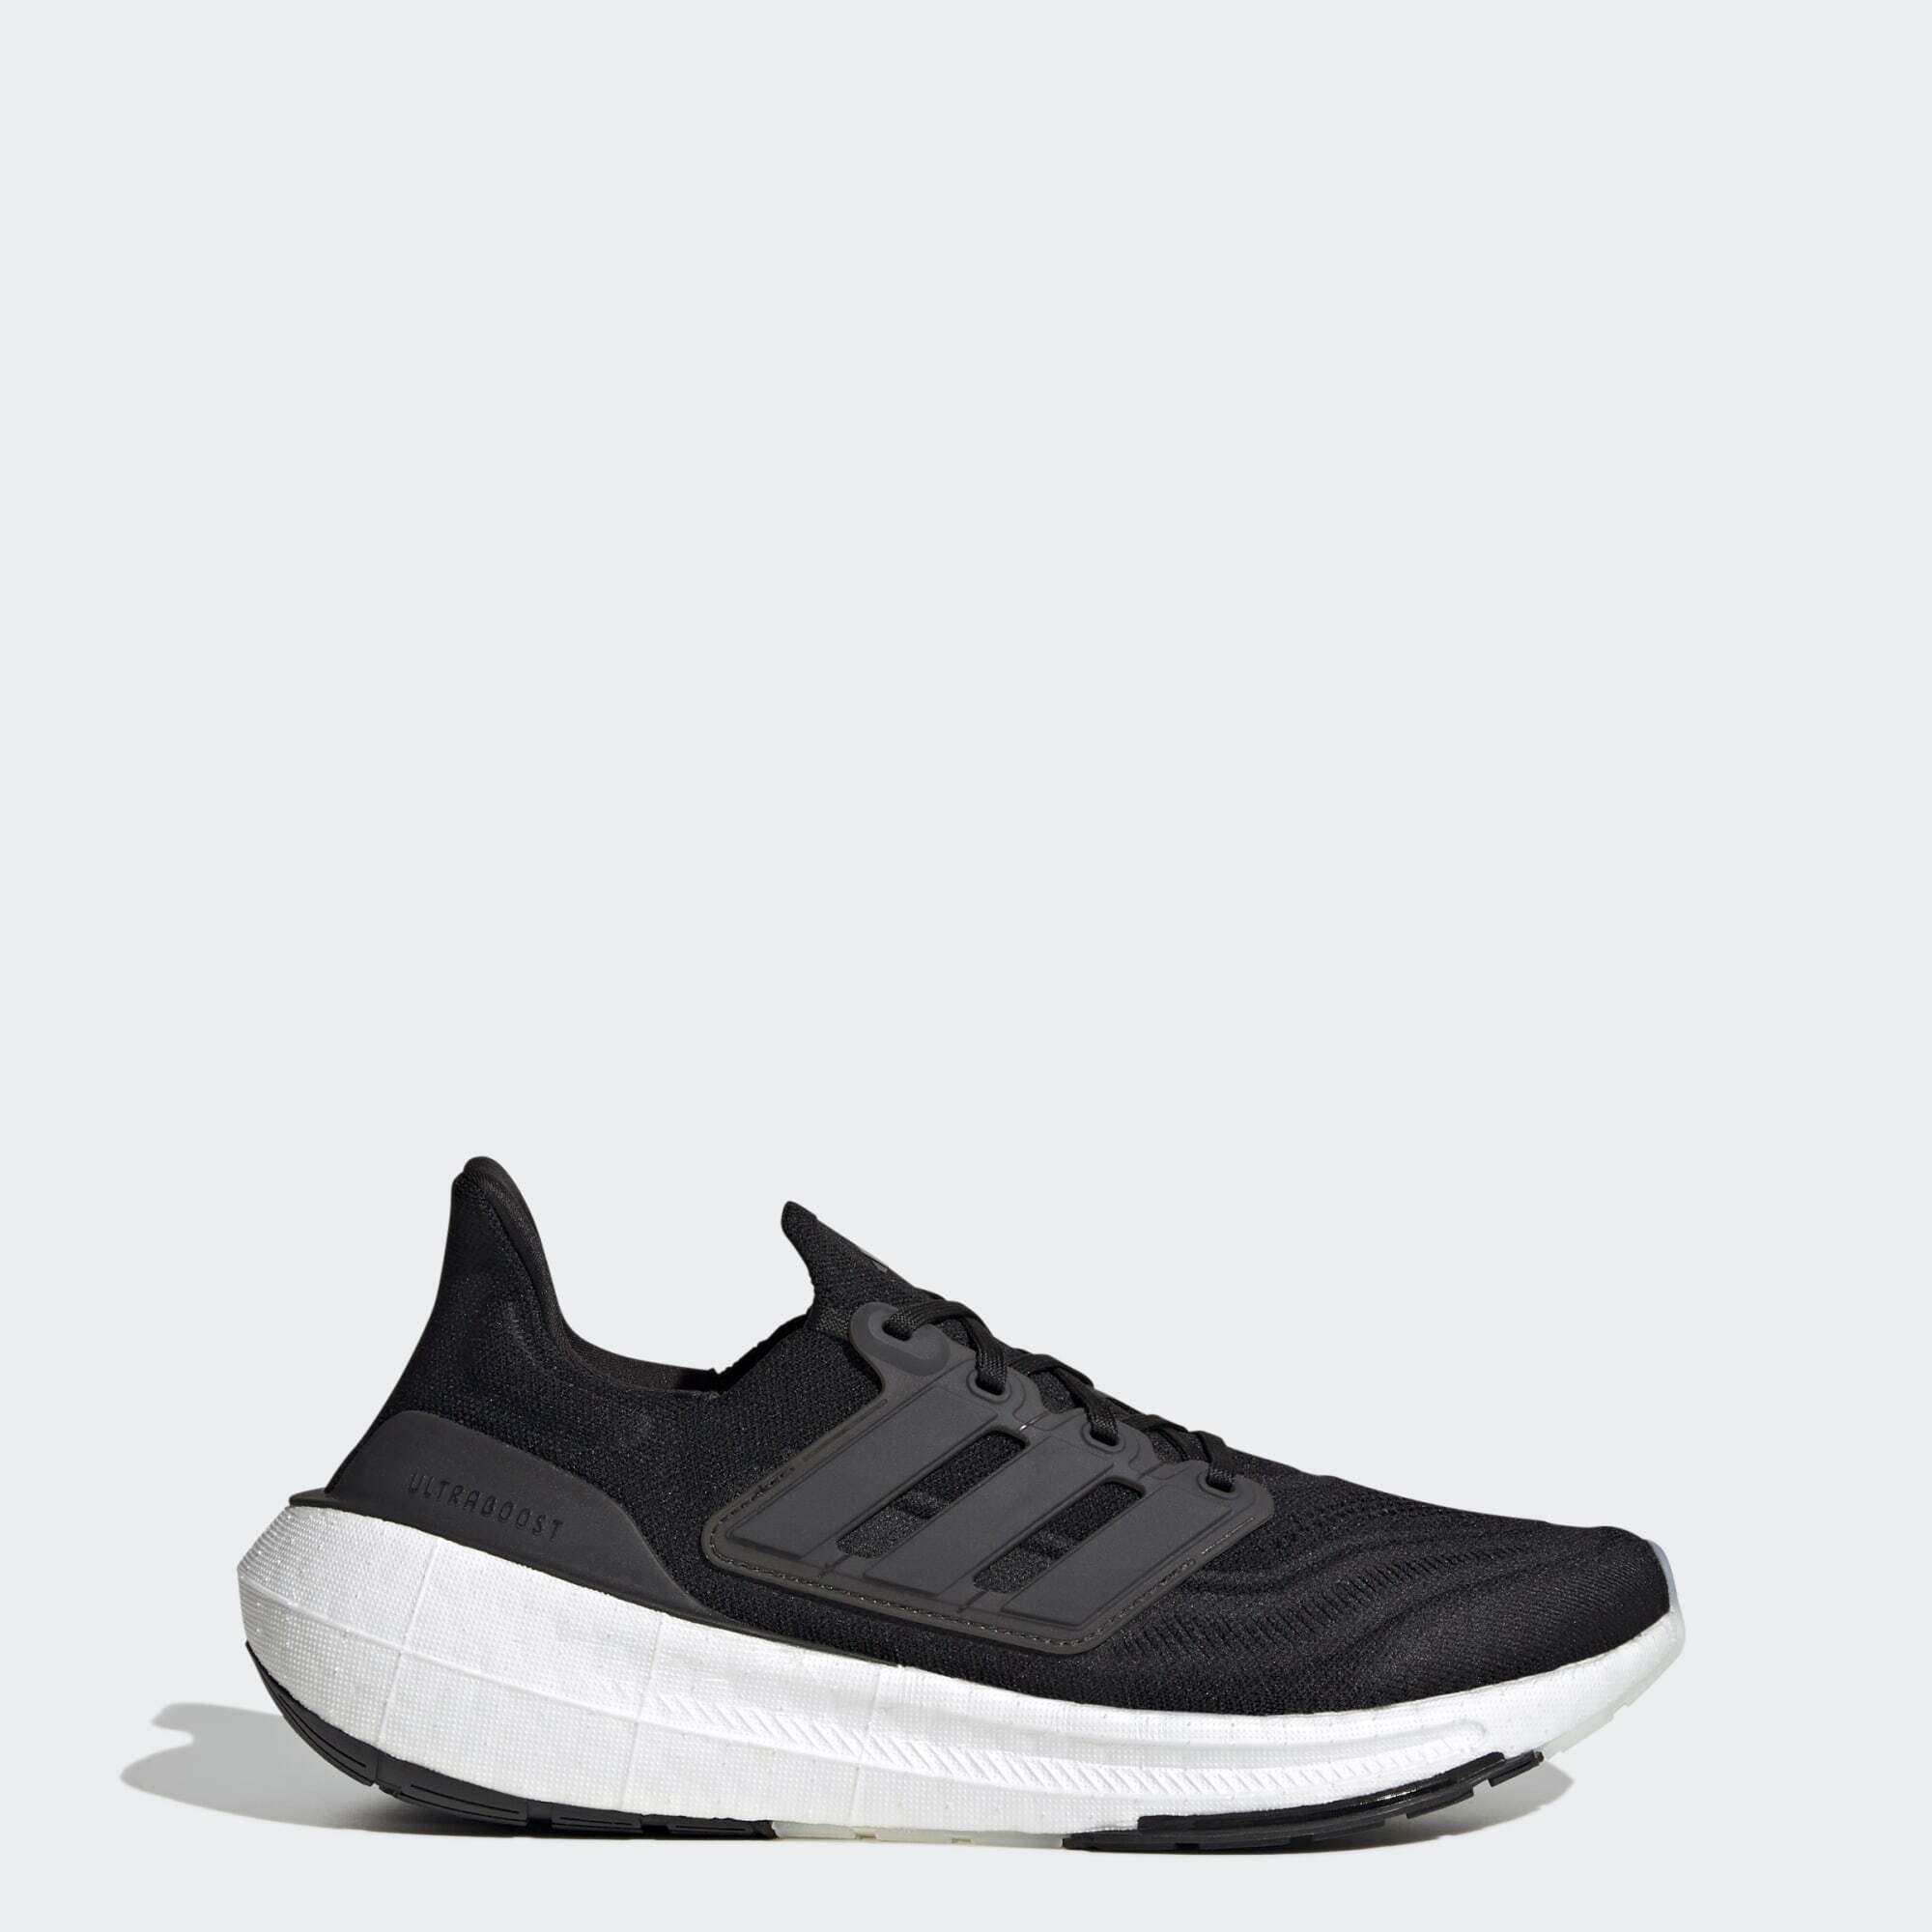 adidas Ultraboost Light Shoes | Pro:Direct Soccer